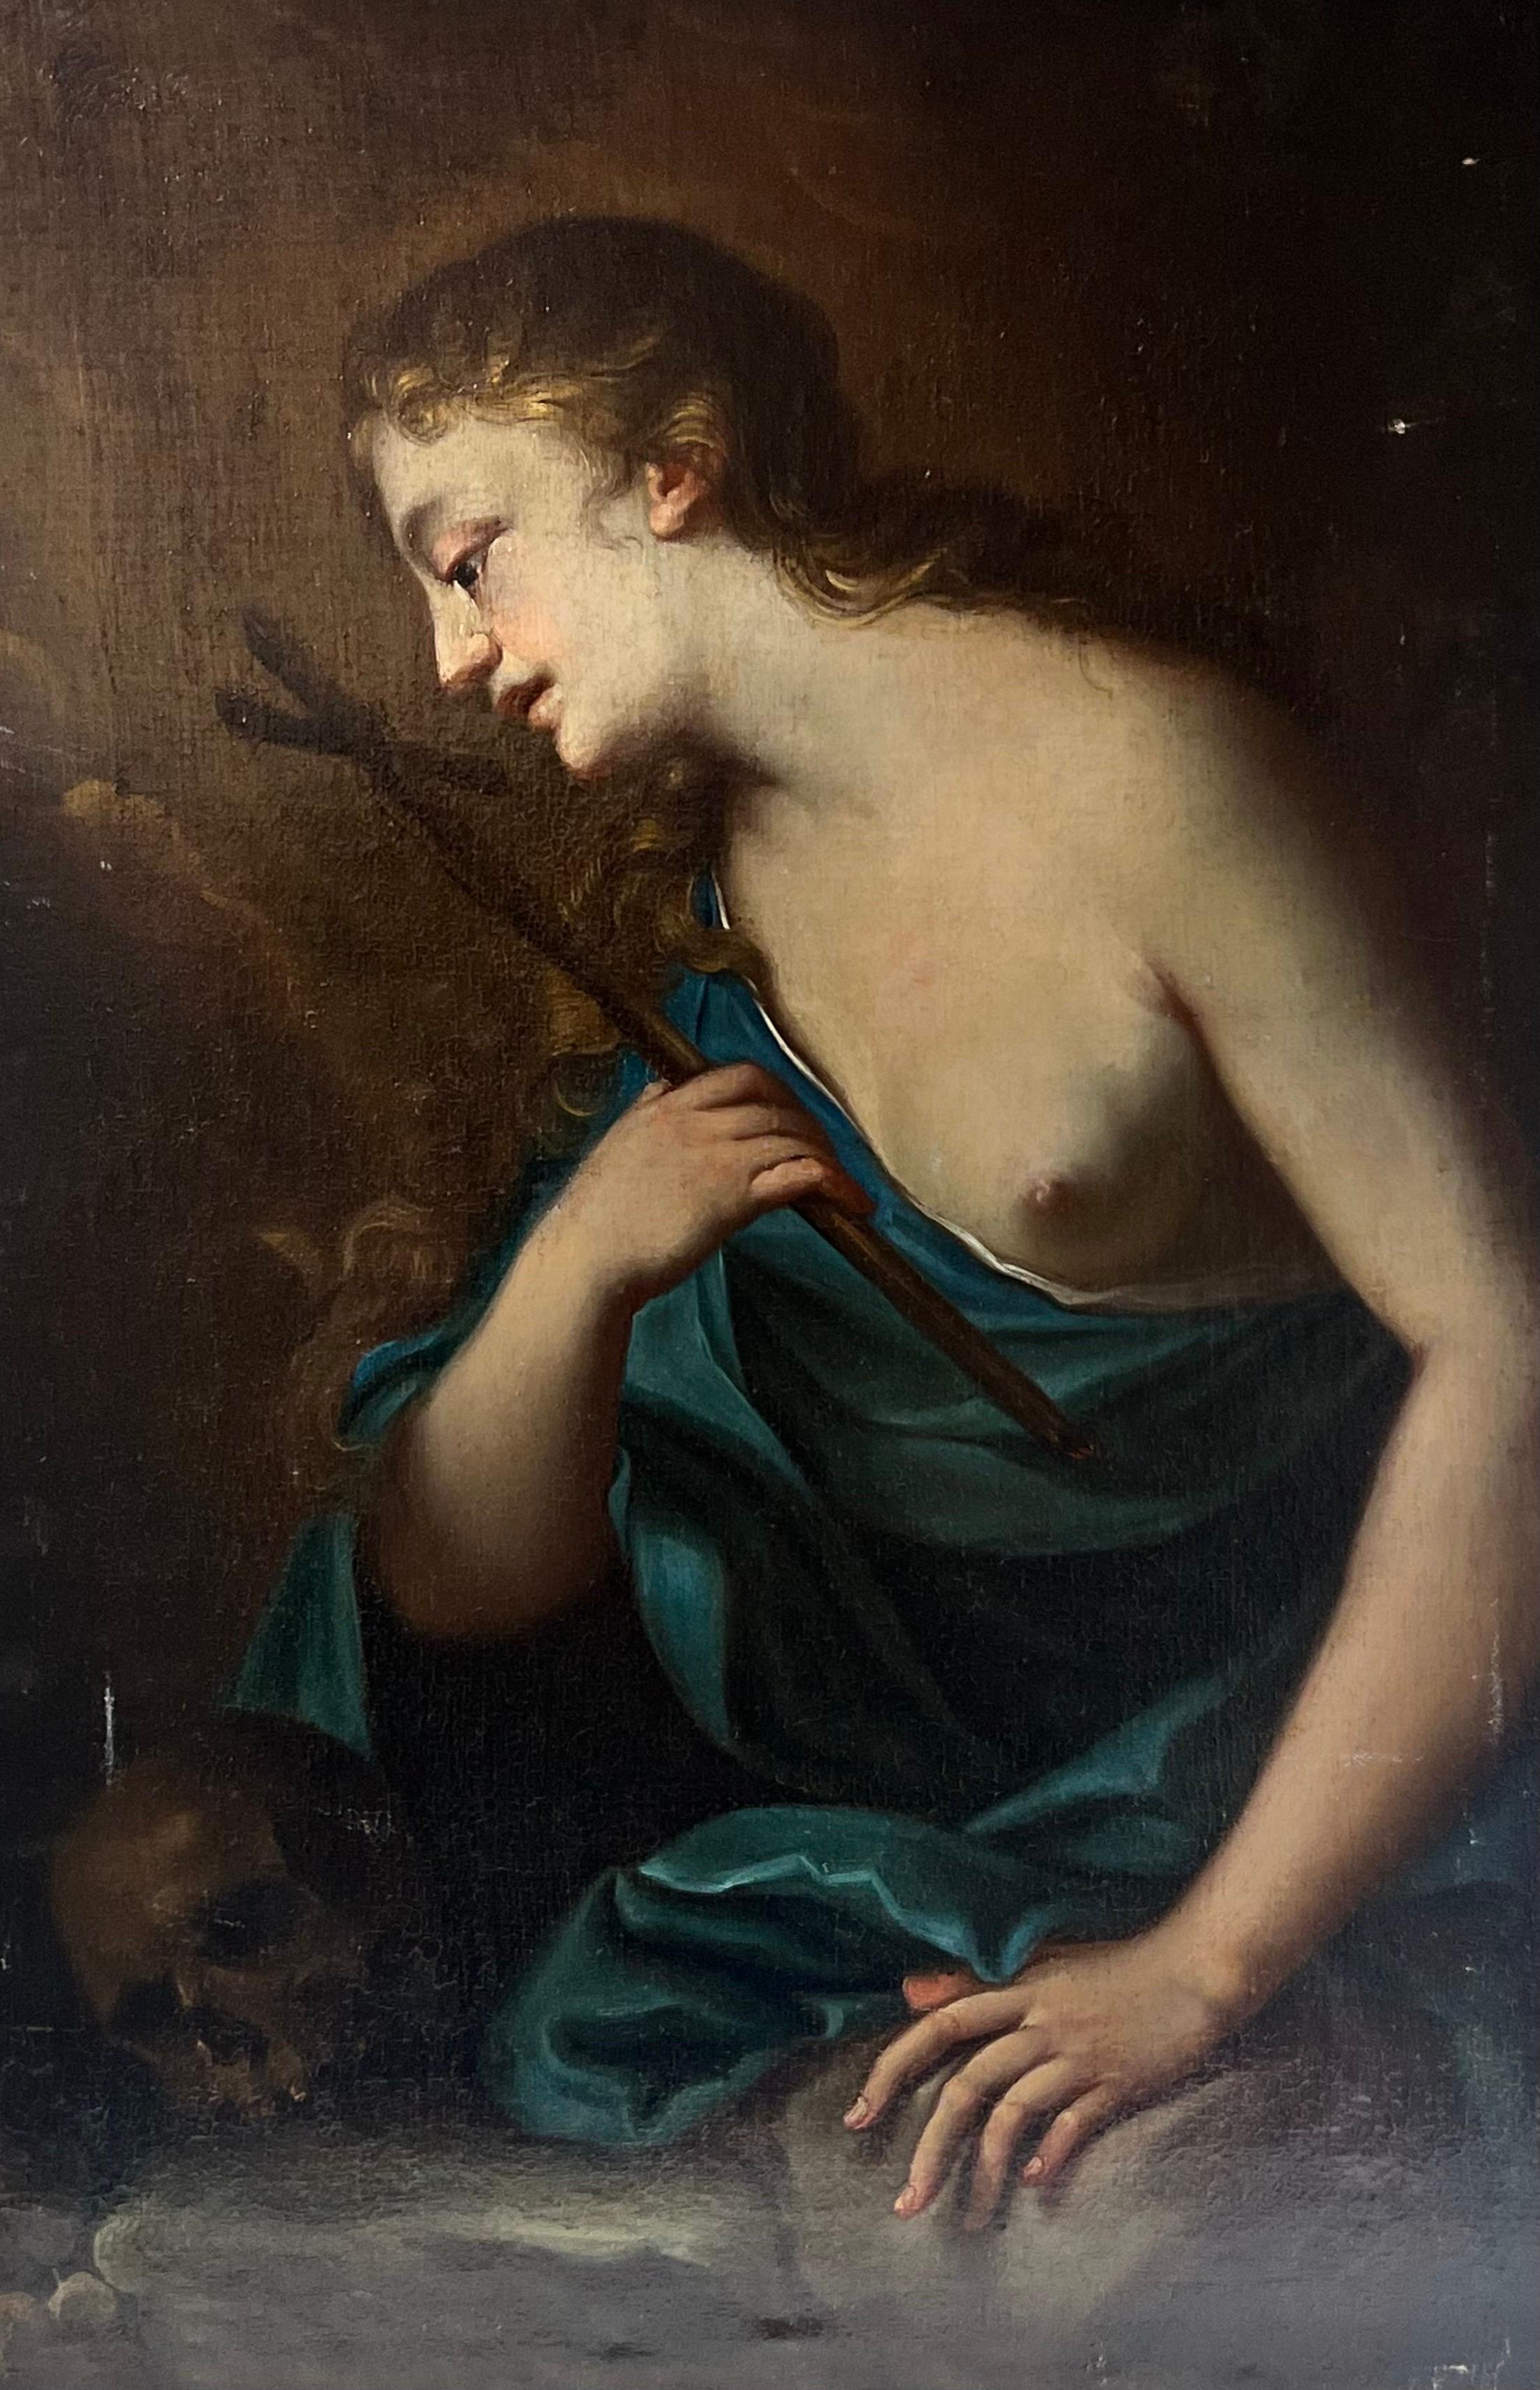 French School Figurative Painting – 1700's French Old Master Ölgemälde The Penitent Magdalene in the Wilderness